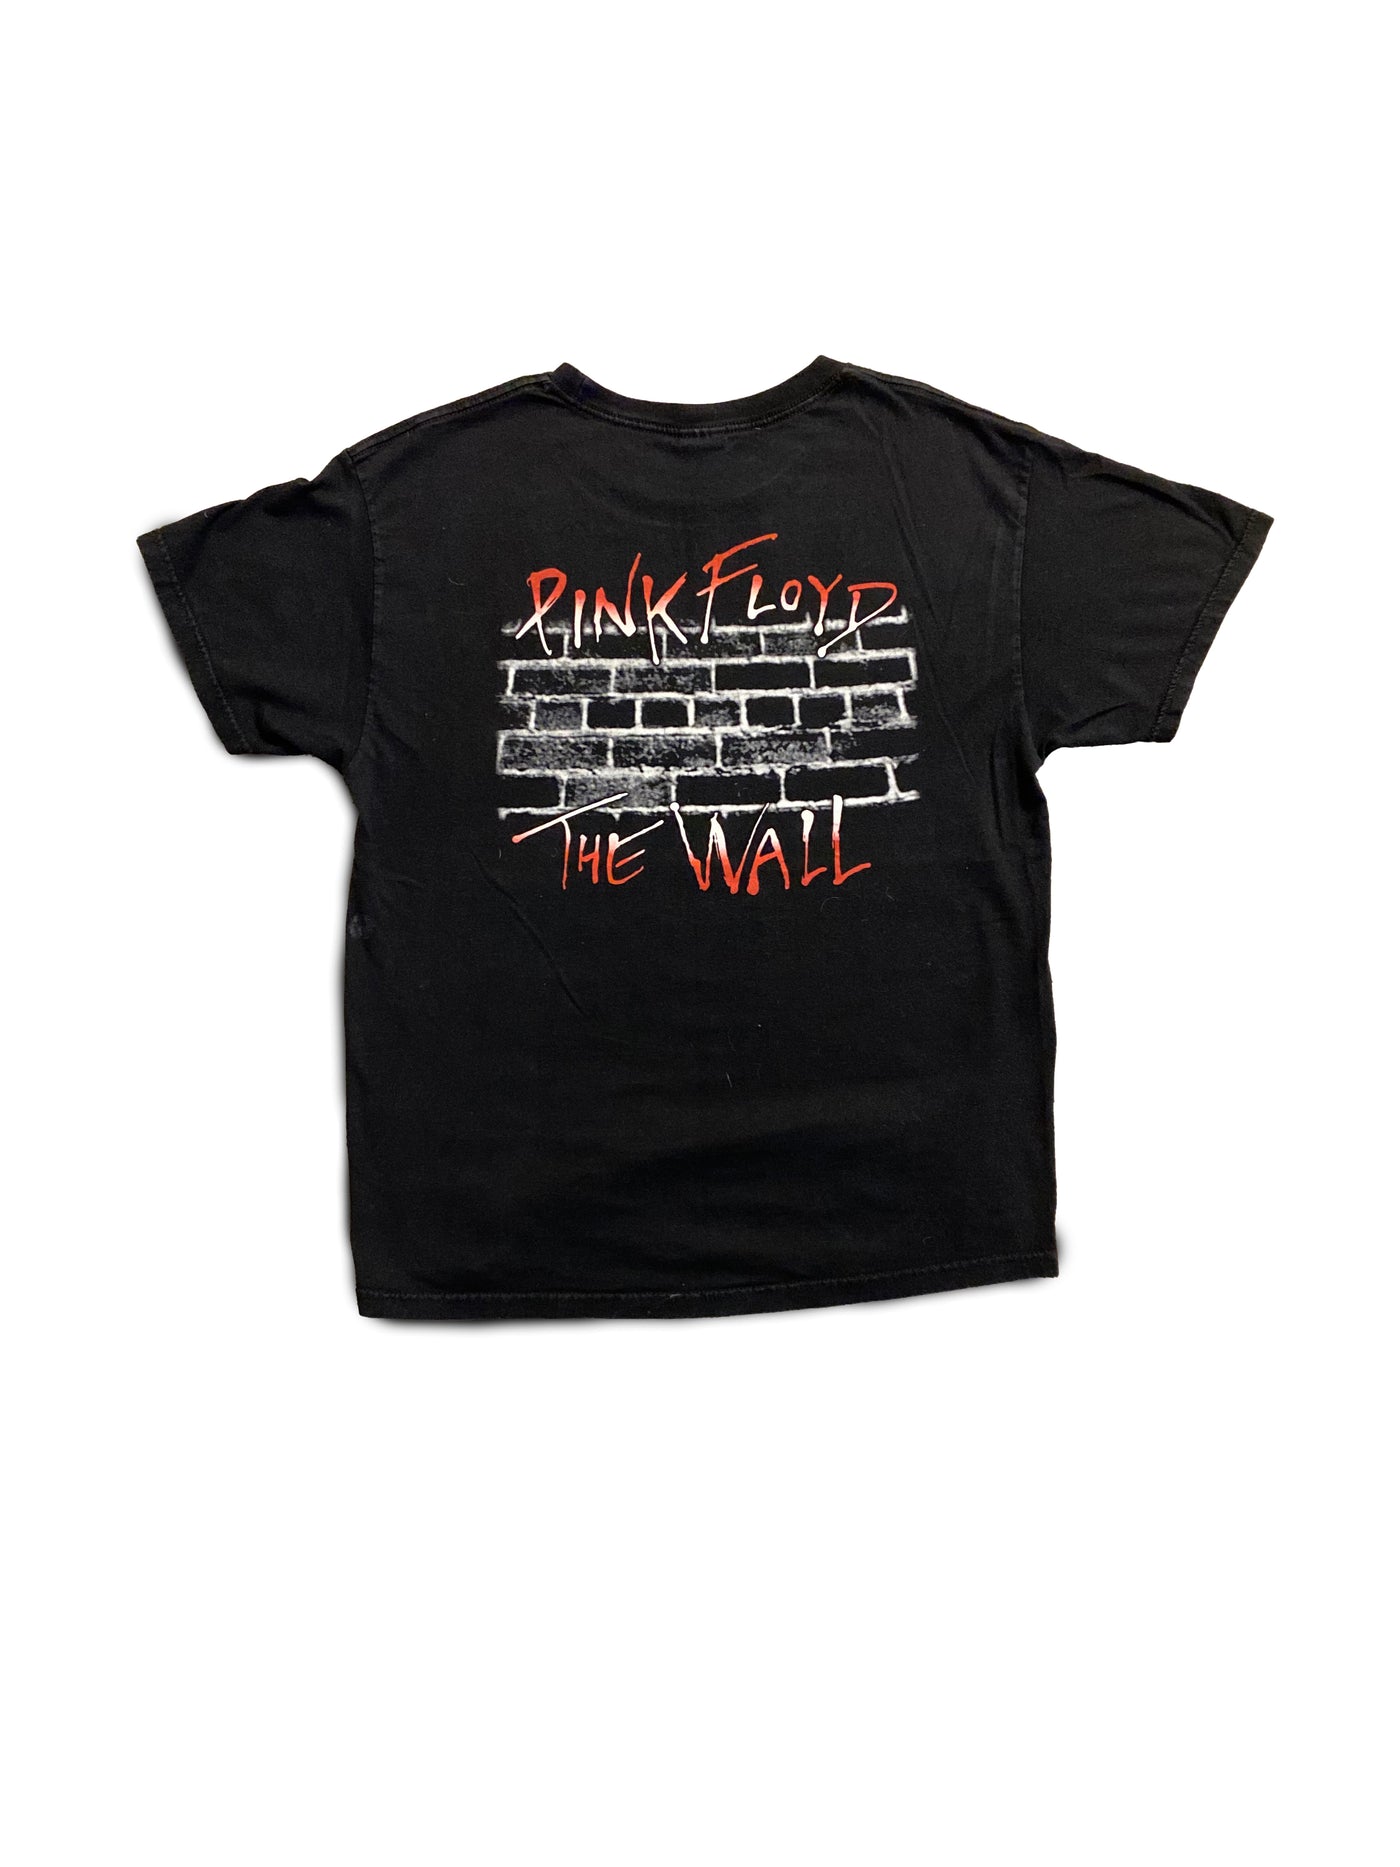 Vintage Tennessee River Pink Floyd The Wall T-Shirt